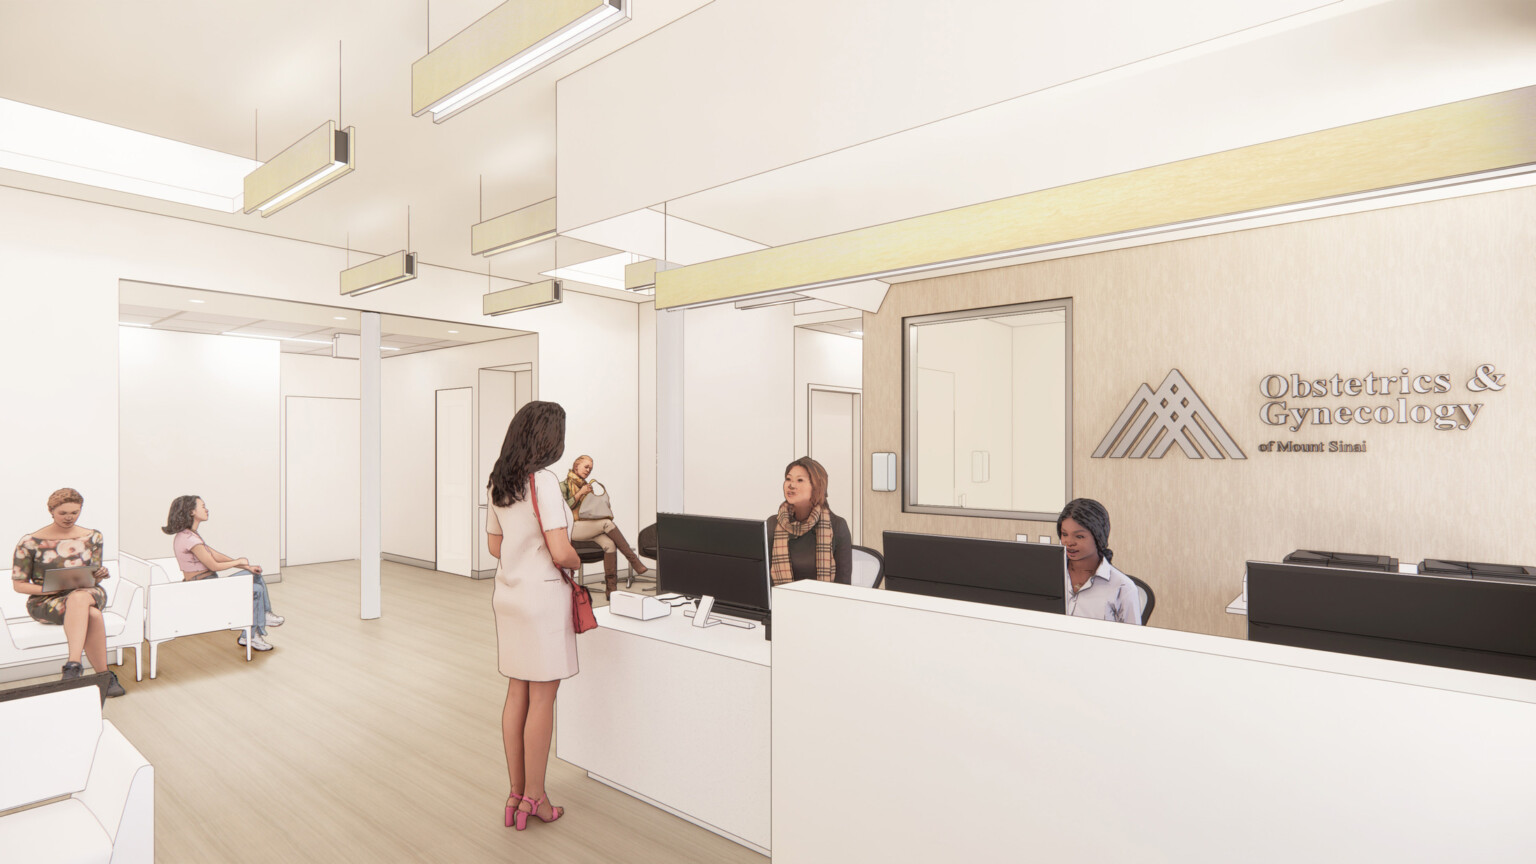 Rendering of a hospital waiting room filled with a patient speaking with workers behind a desk.